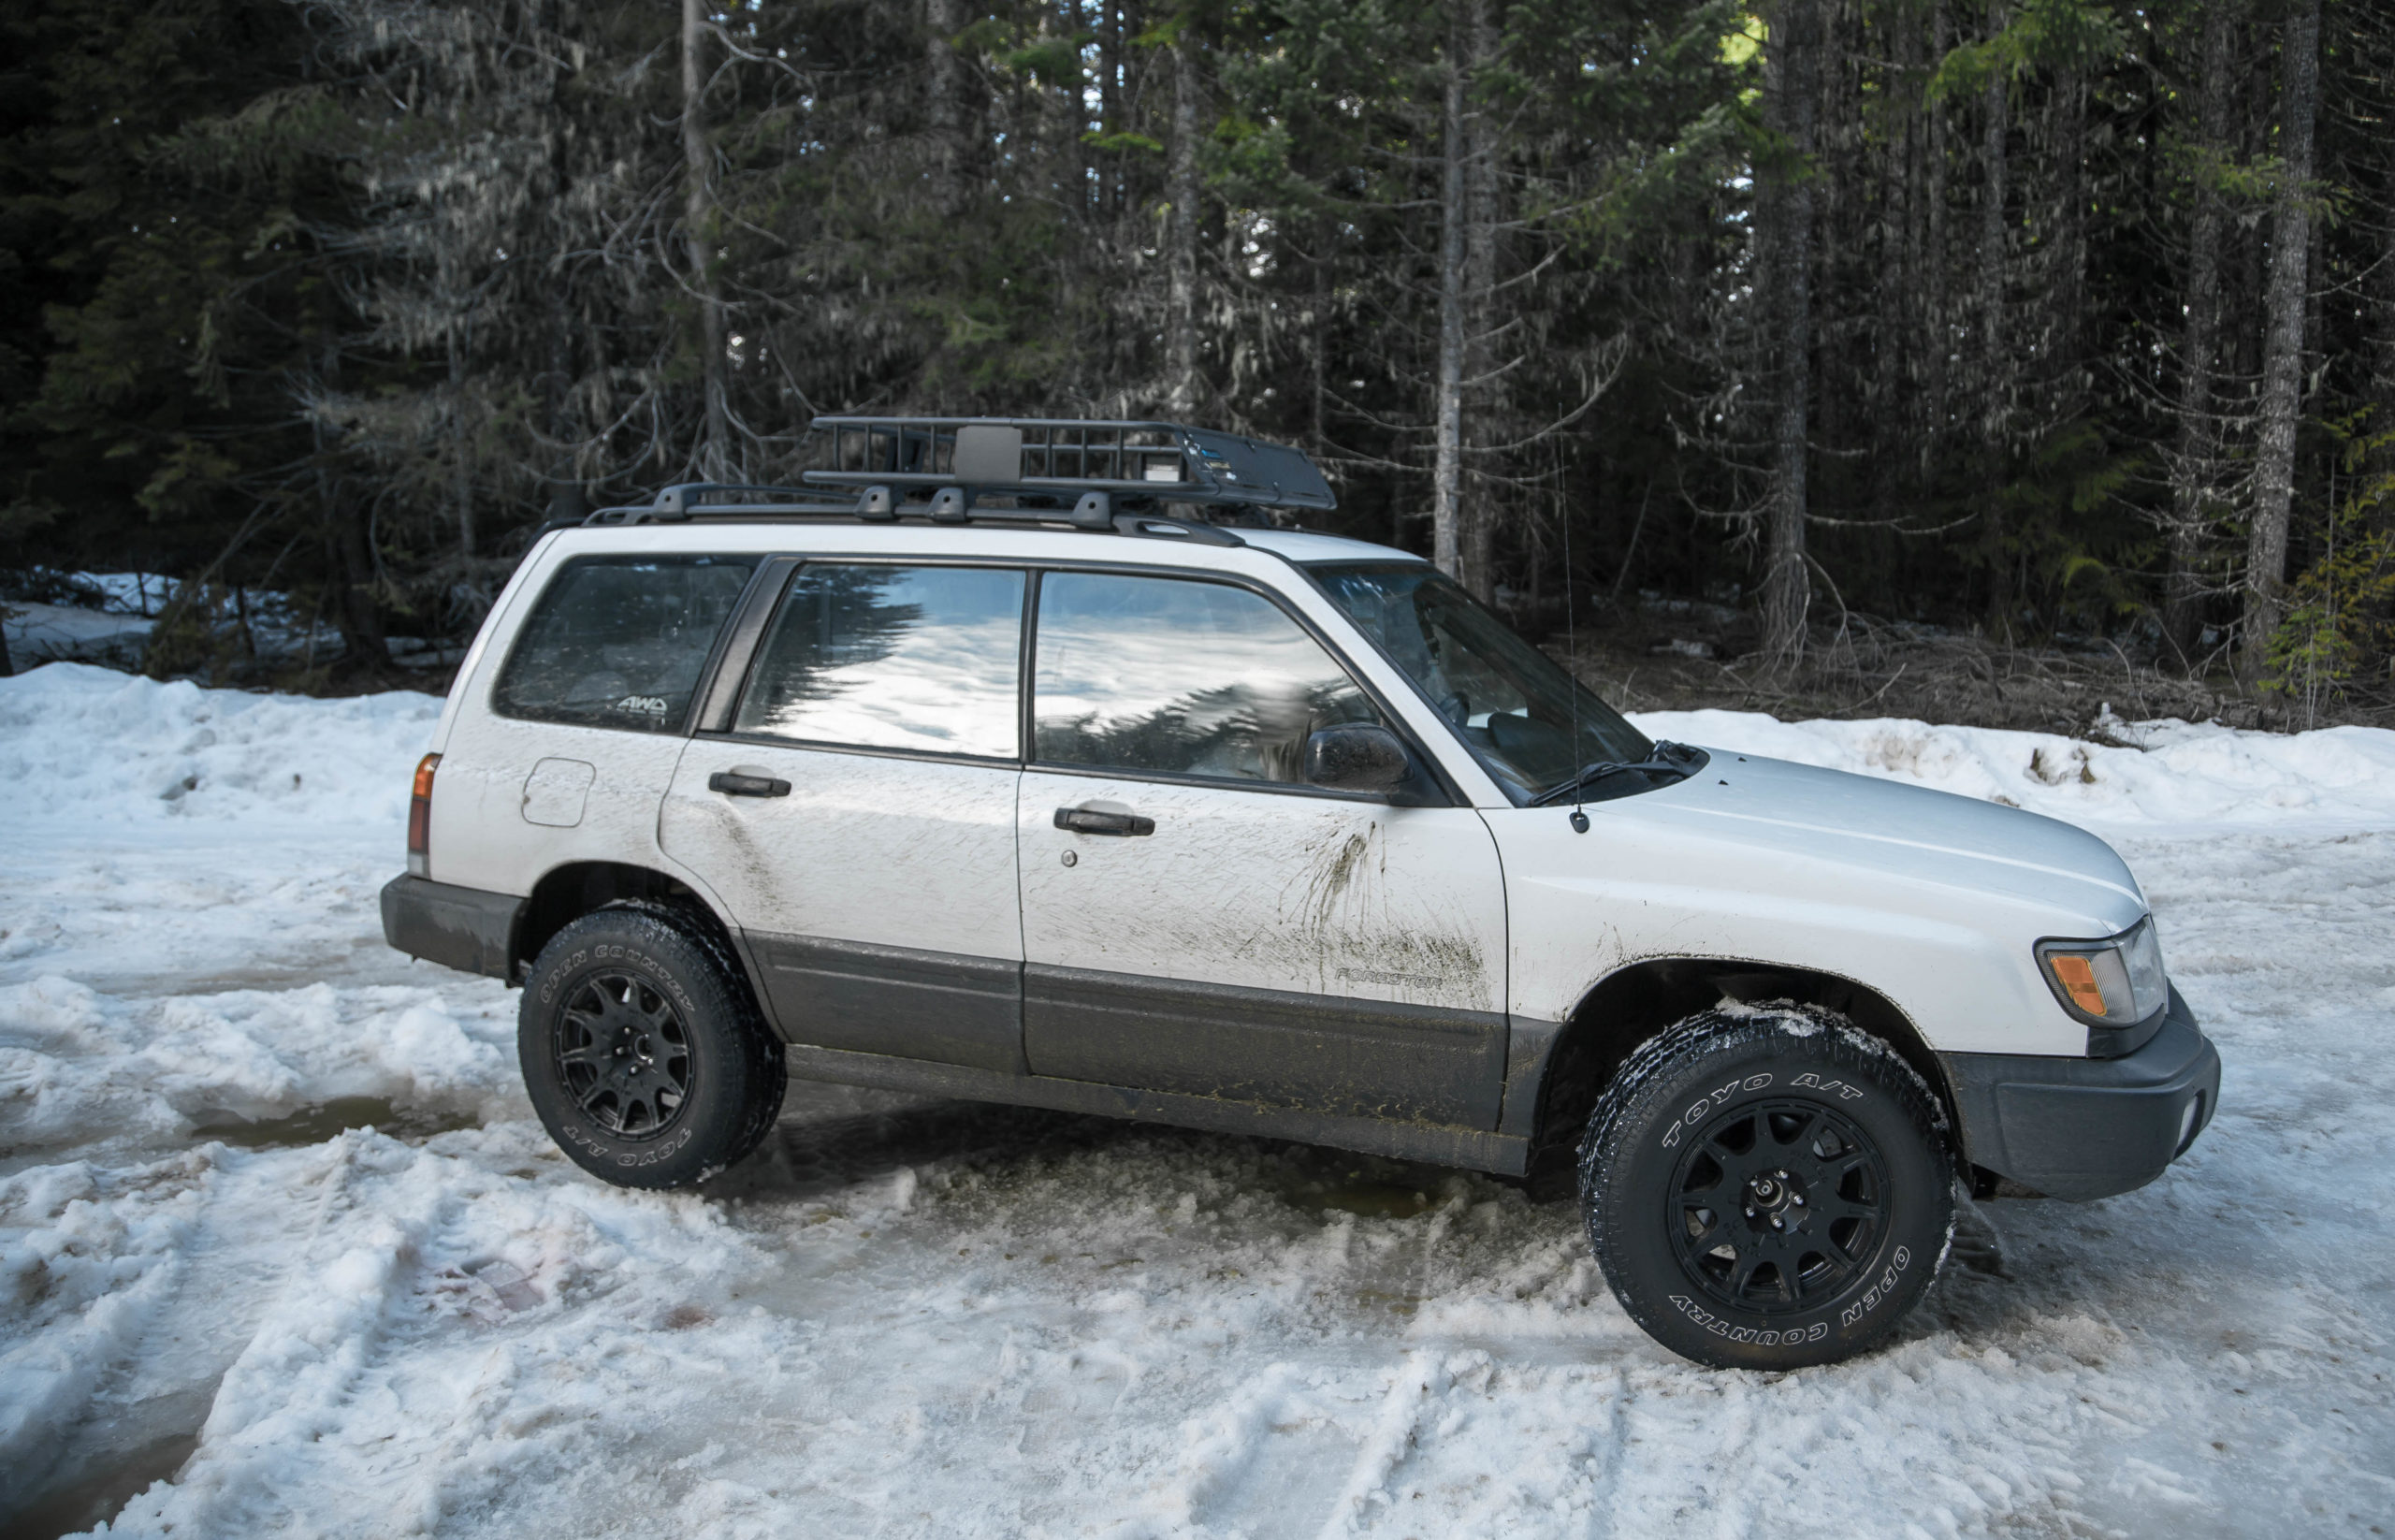 Lifted Subaru Forester in the snow with off road tires